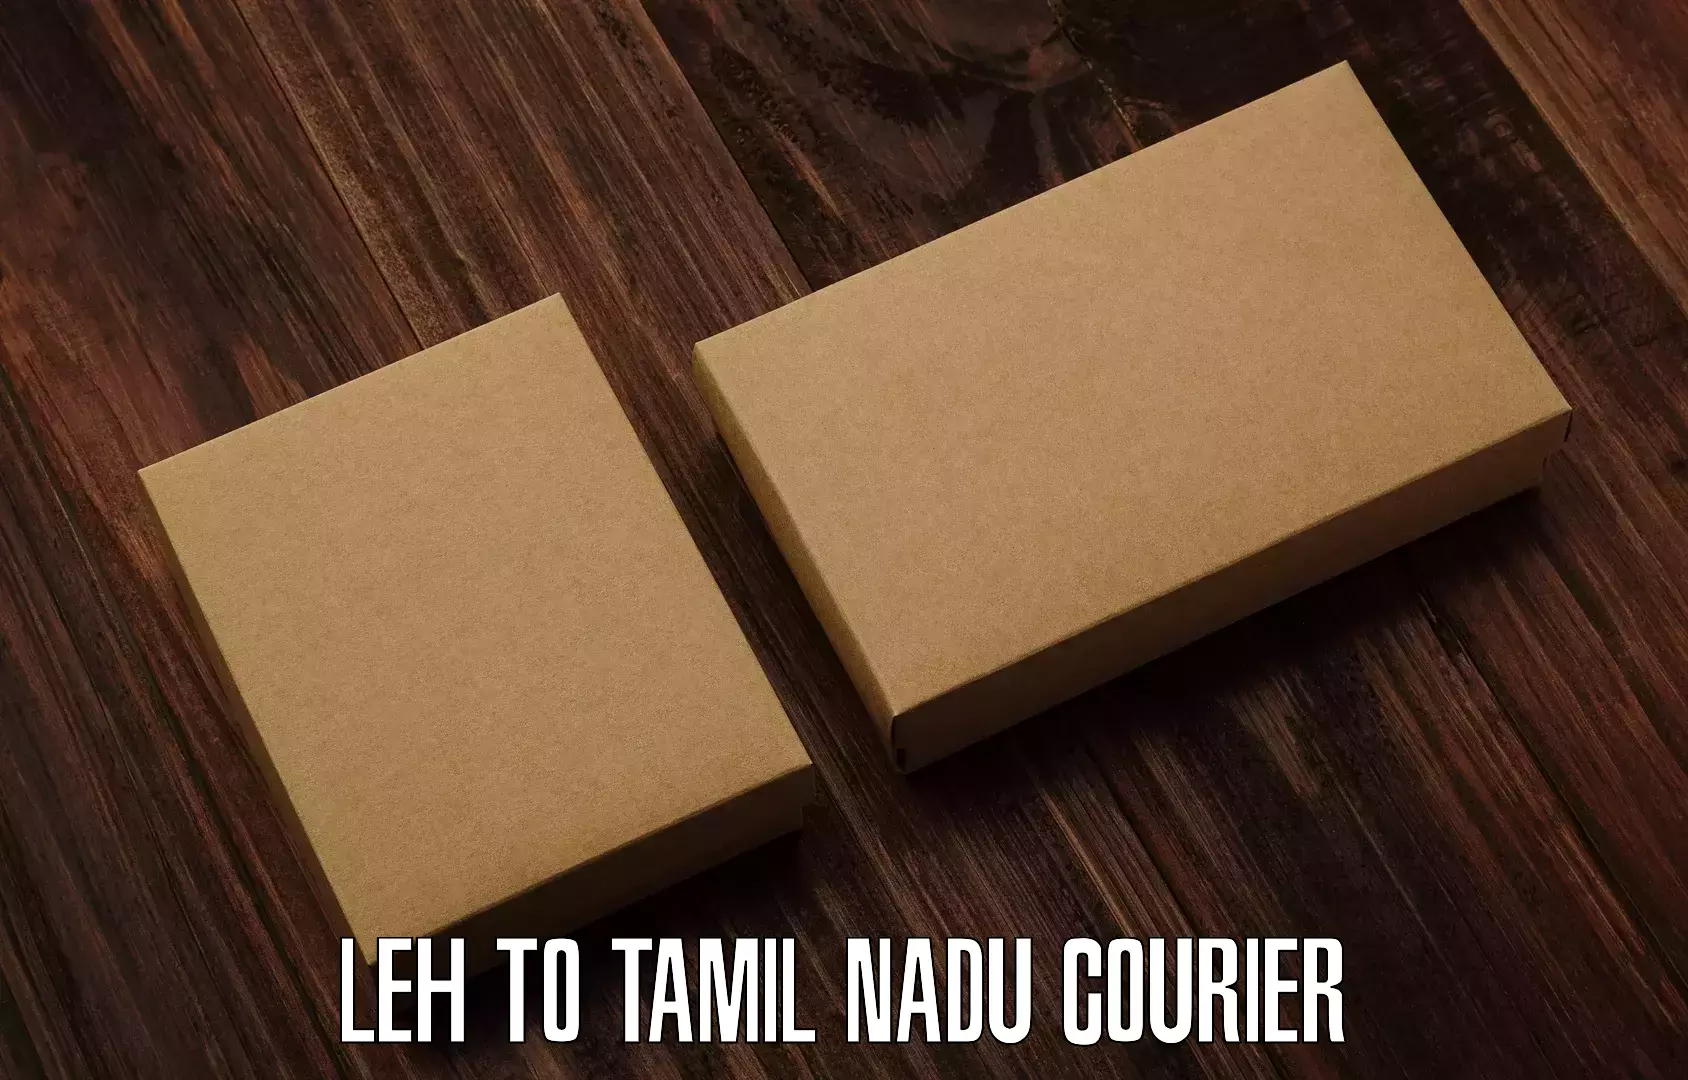 Full-service courier options Leh to Manapparai